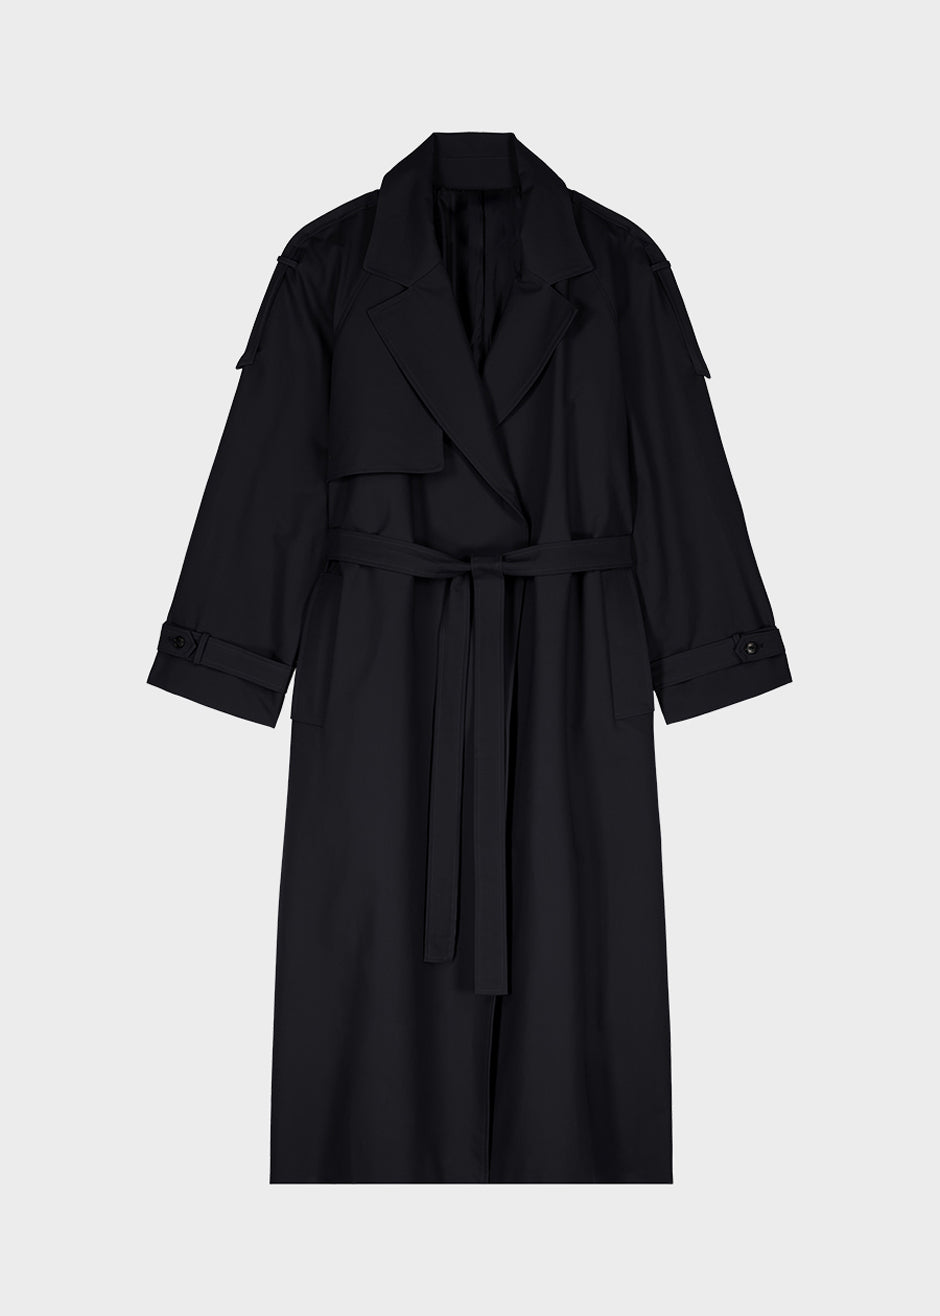 Suzanne Trench Coat - Black - 7